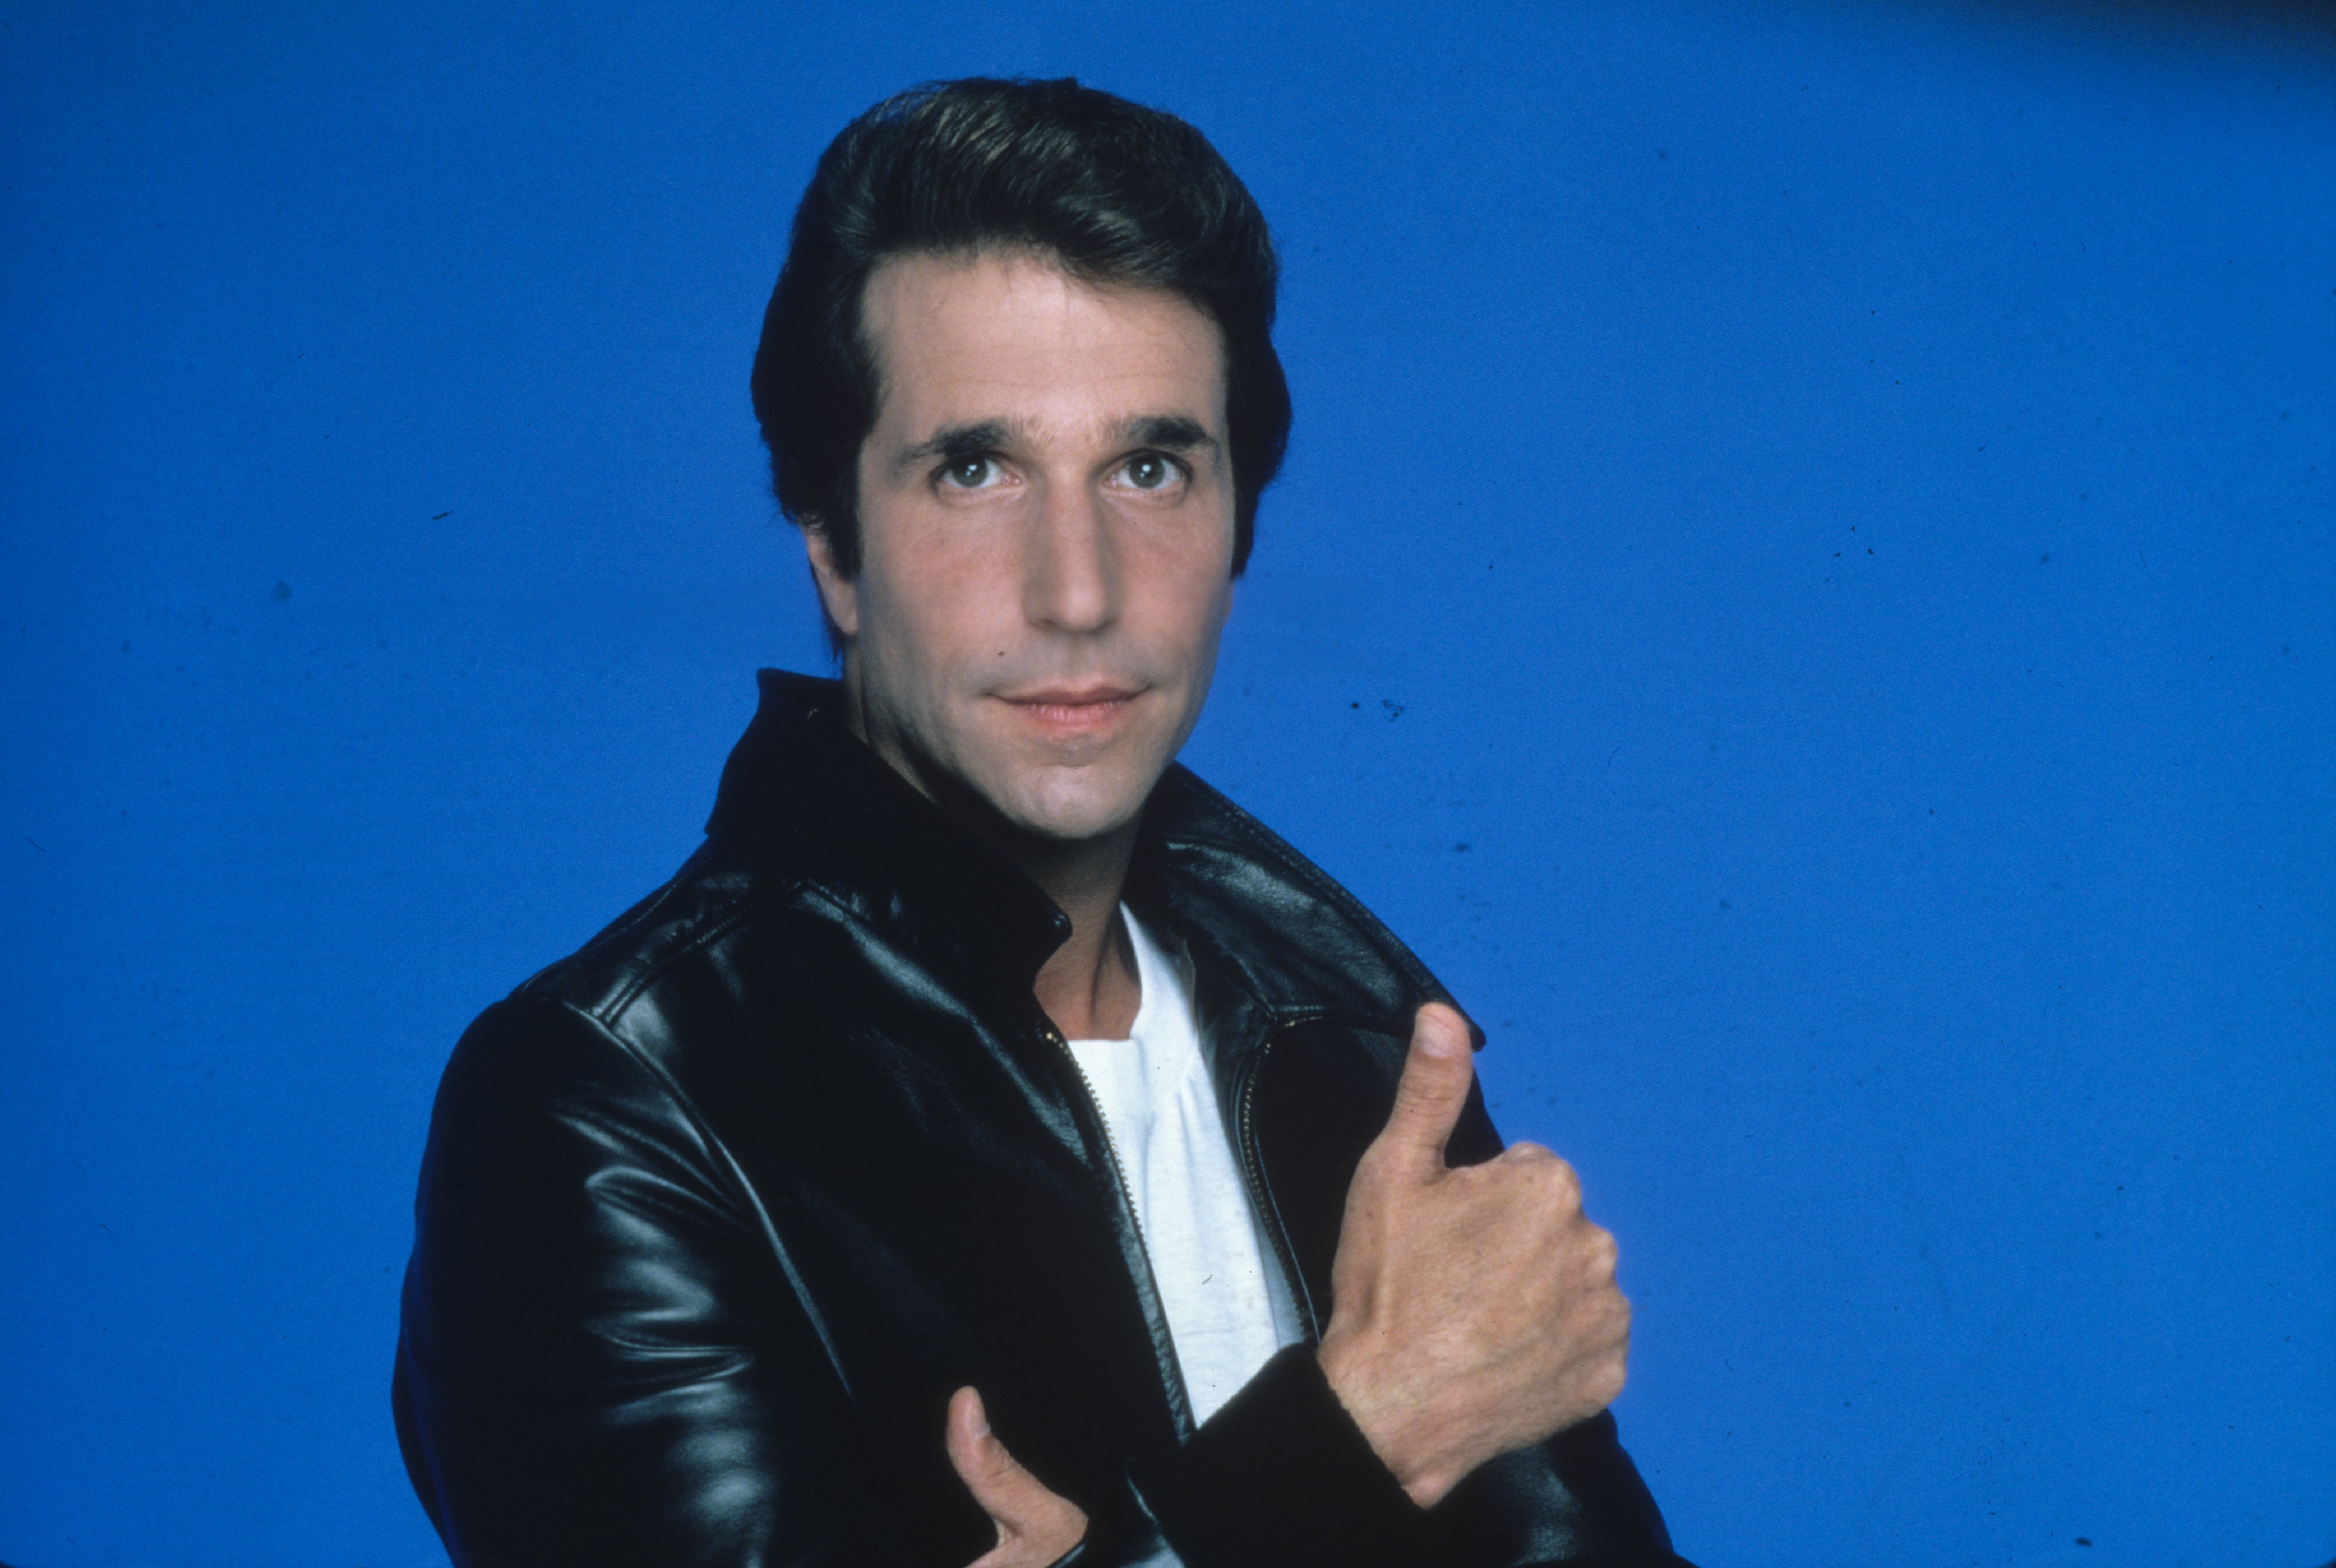 Henry Winkler as "Fonzie" from Season 2 of "Happy Days" in July 10, 1975 | Source: Getty Images